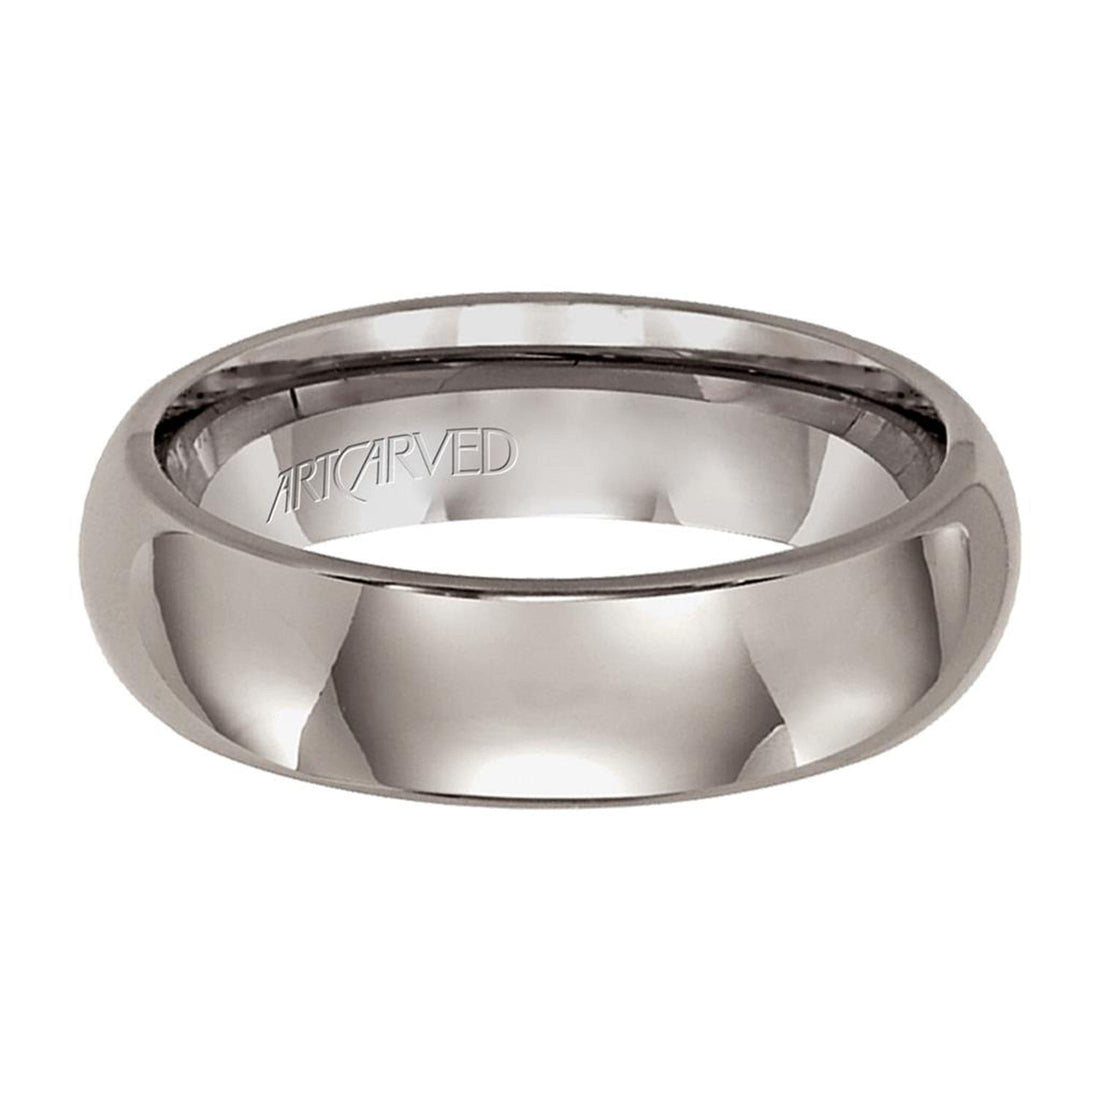 Bright Titanium Wedding Band by Artcarved Angled